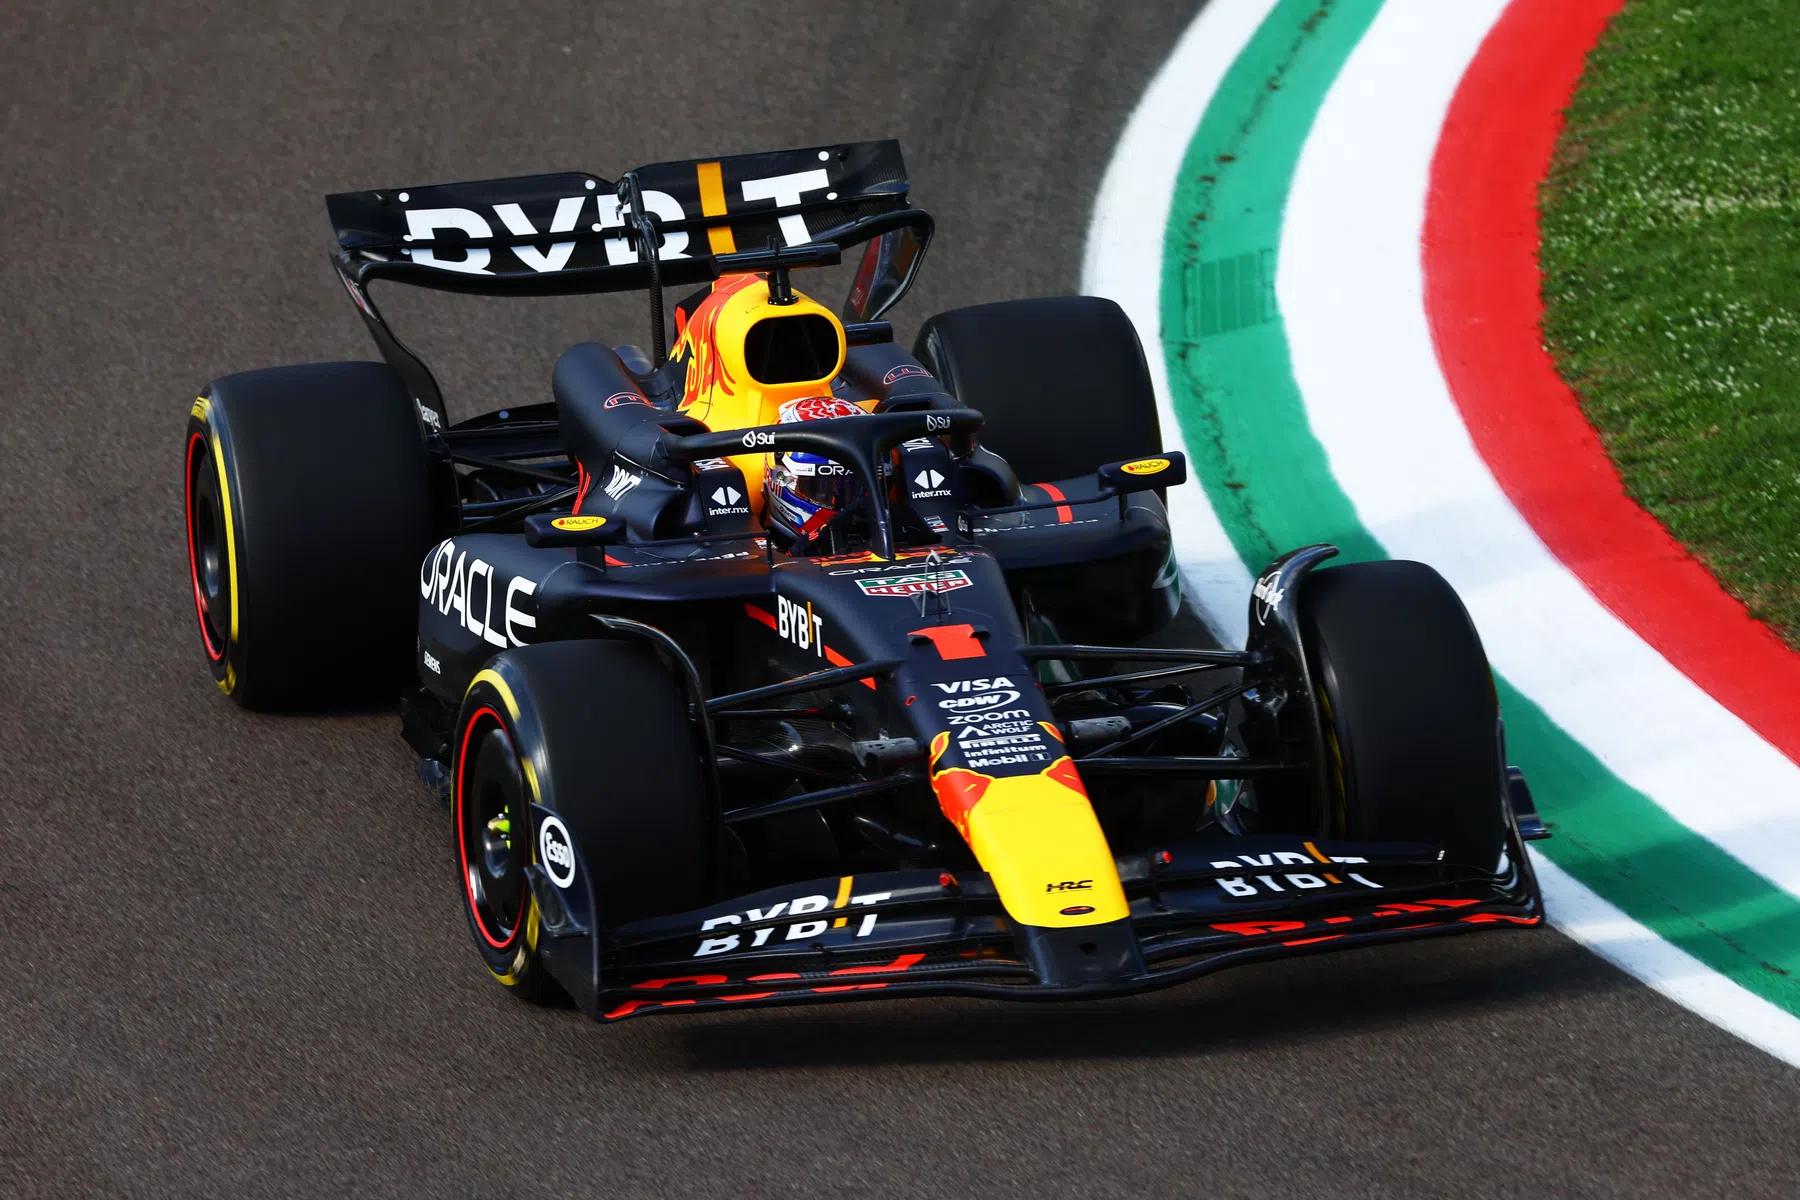 Red Bull Racing has vote on livery for Silverstone